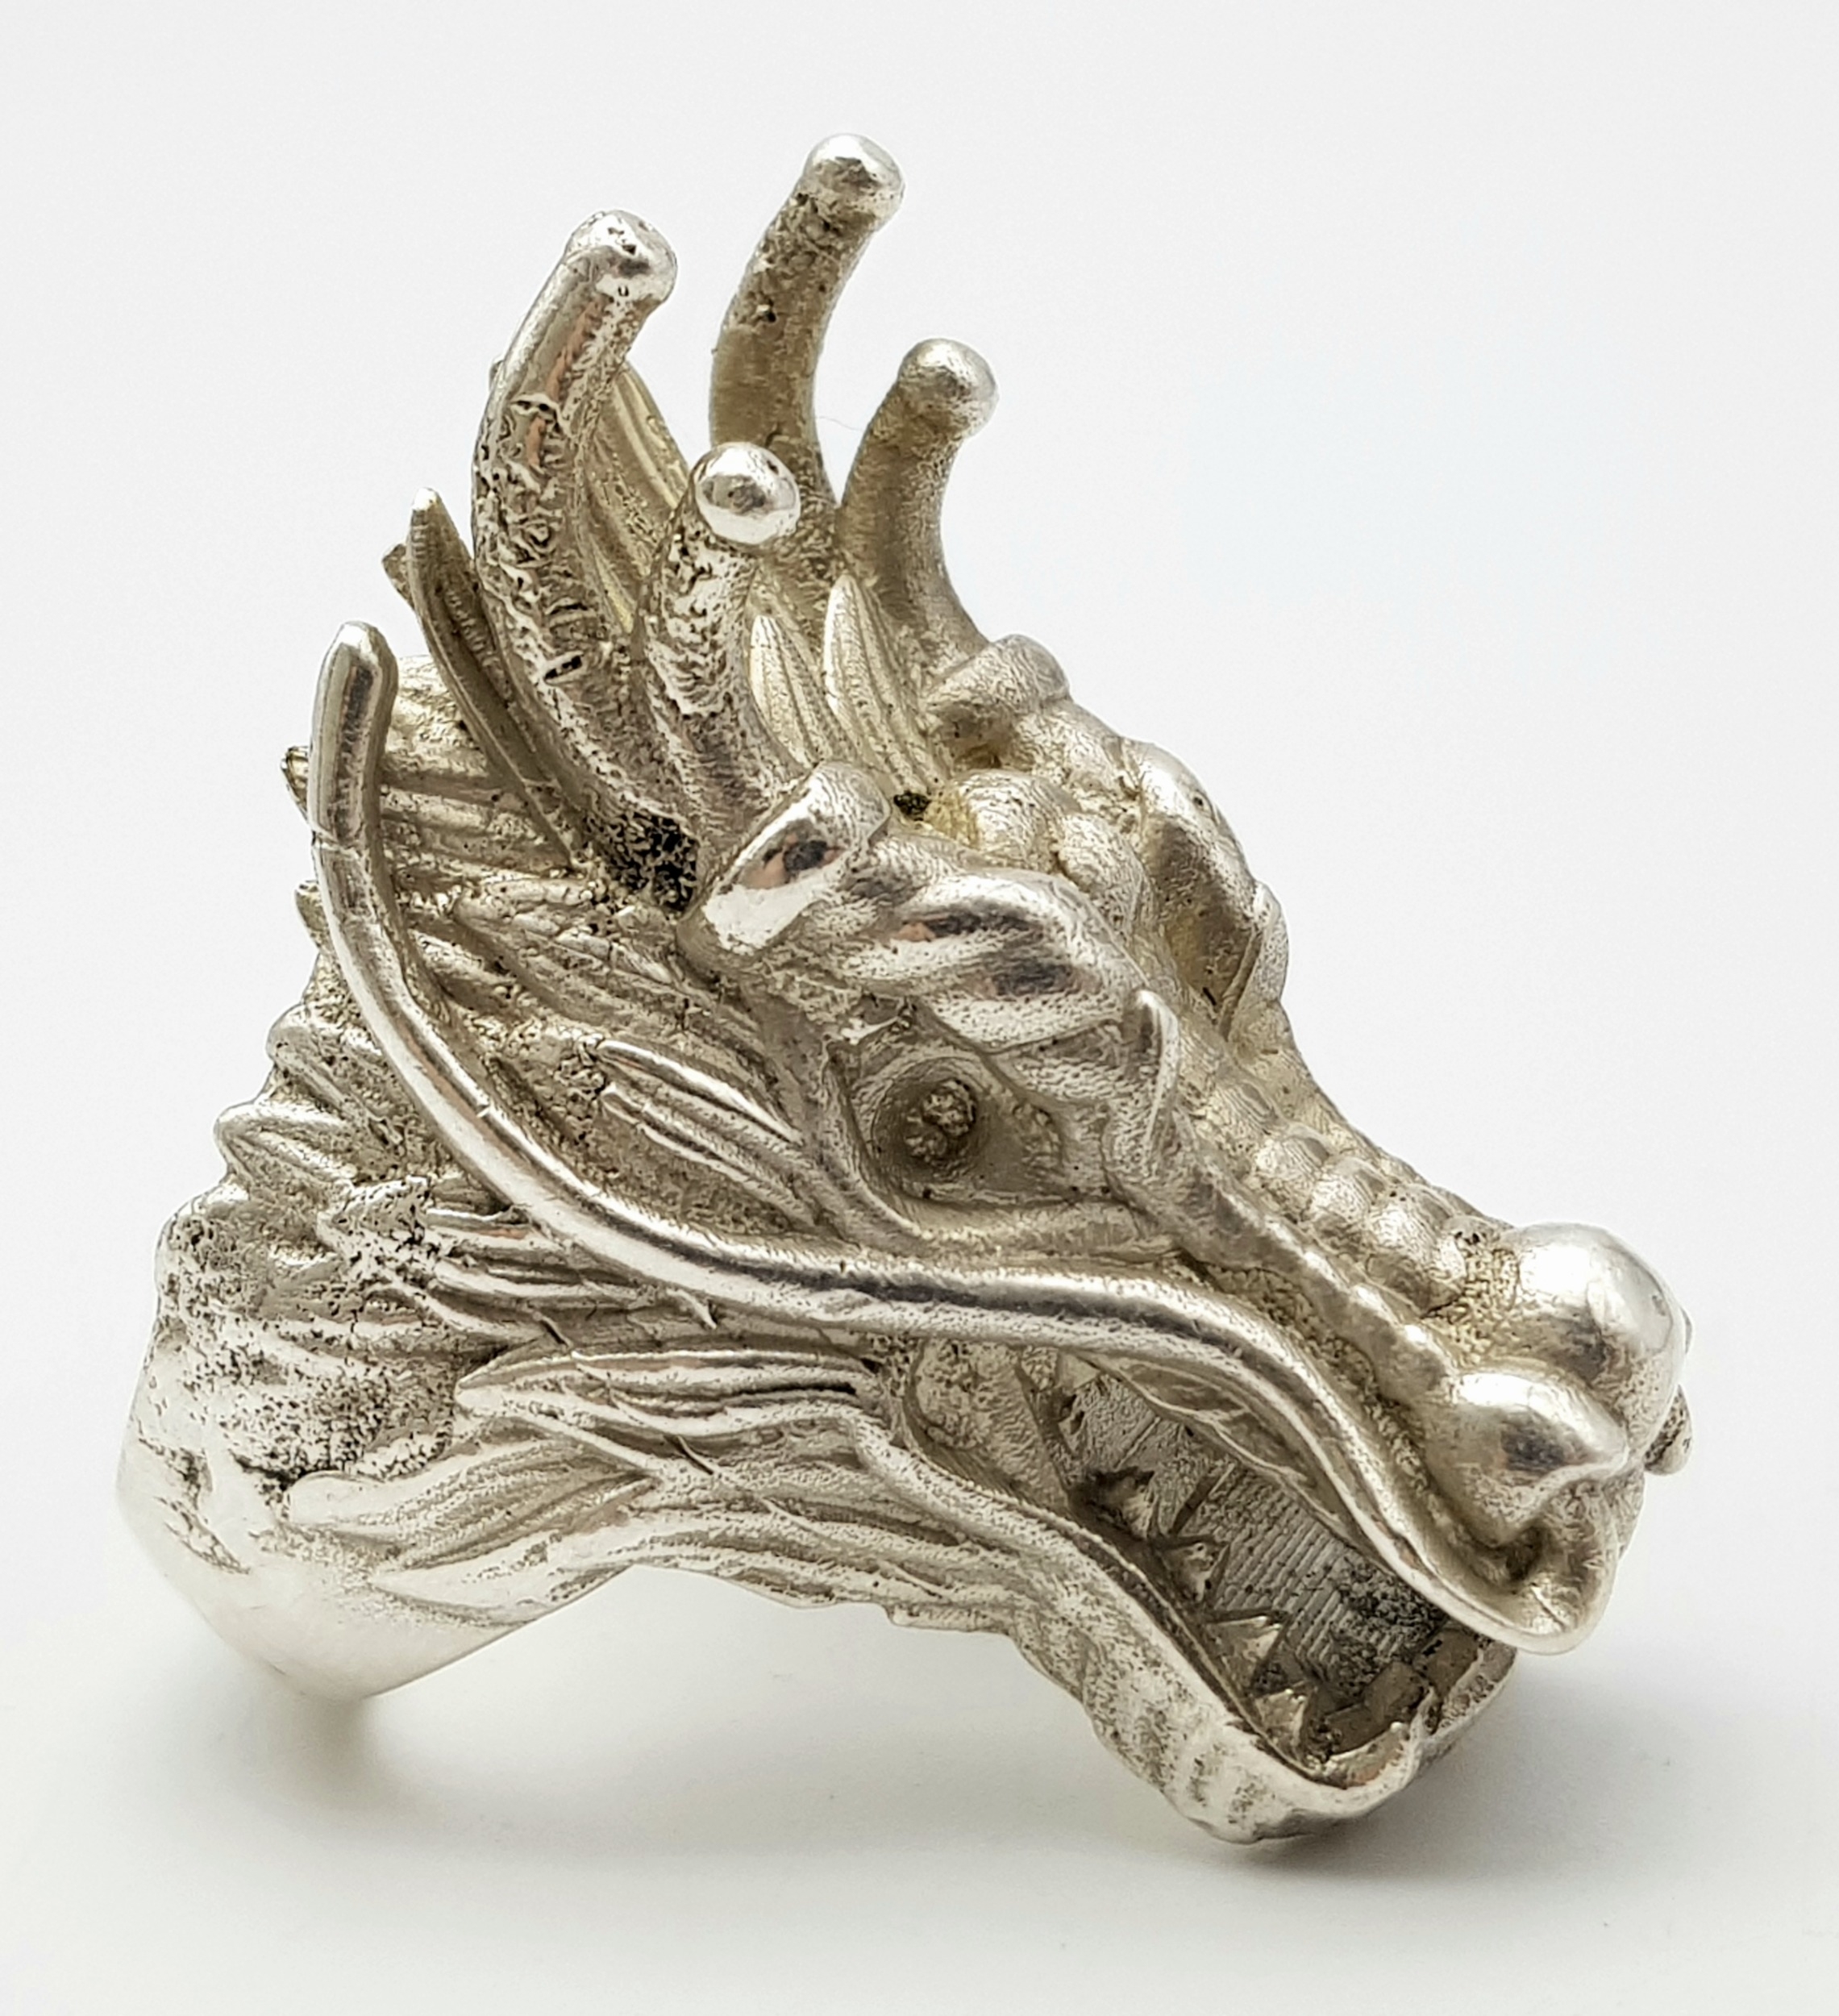 A STERLING SILVER DRAGONS HEAD RING, STUNNING DETAIL AND HEAVY. 4.2cm dragon head length, 86.8g - Image 2 of 6